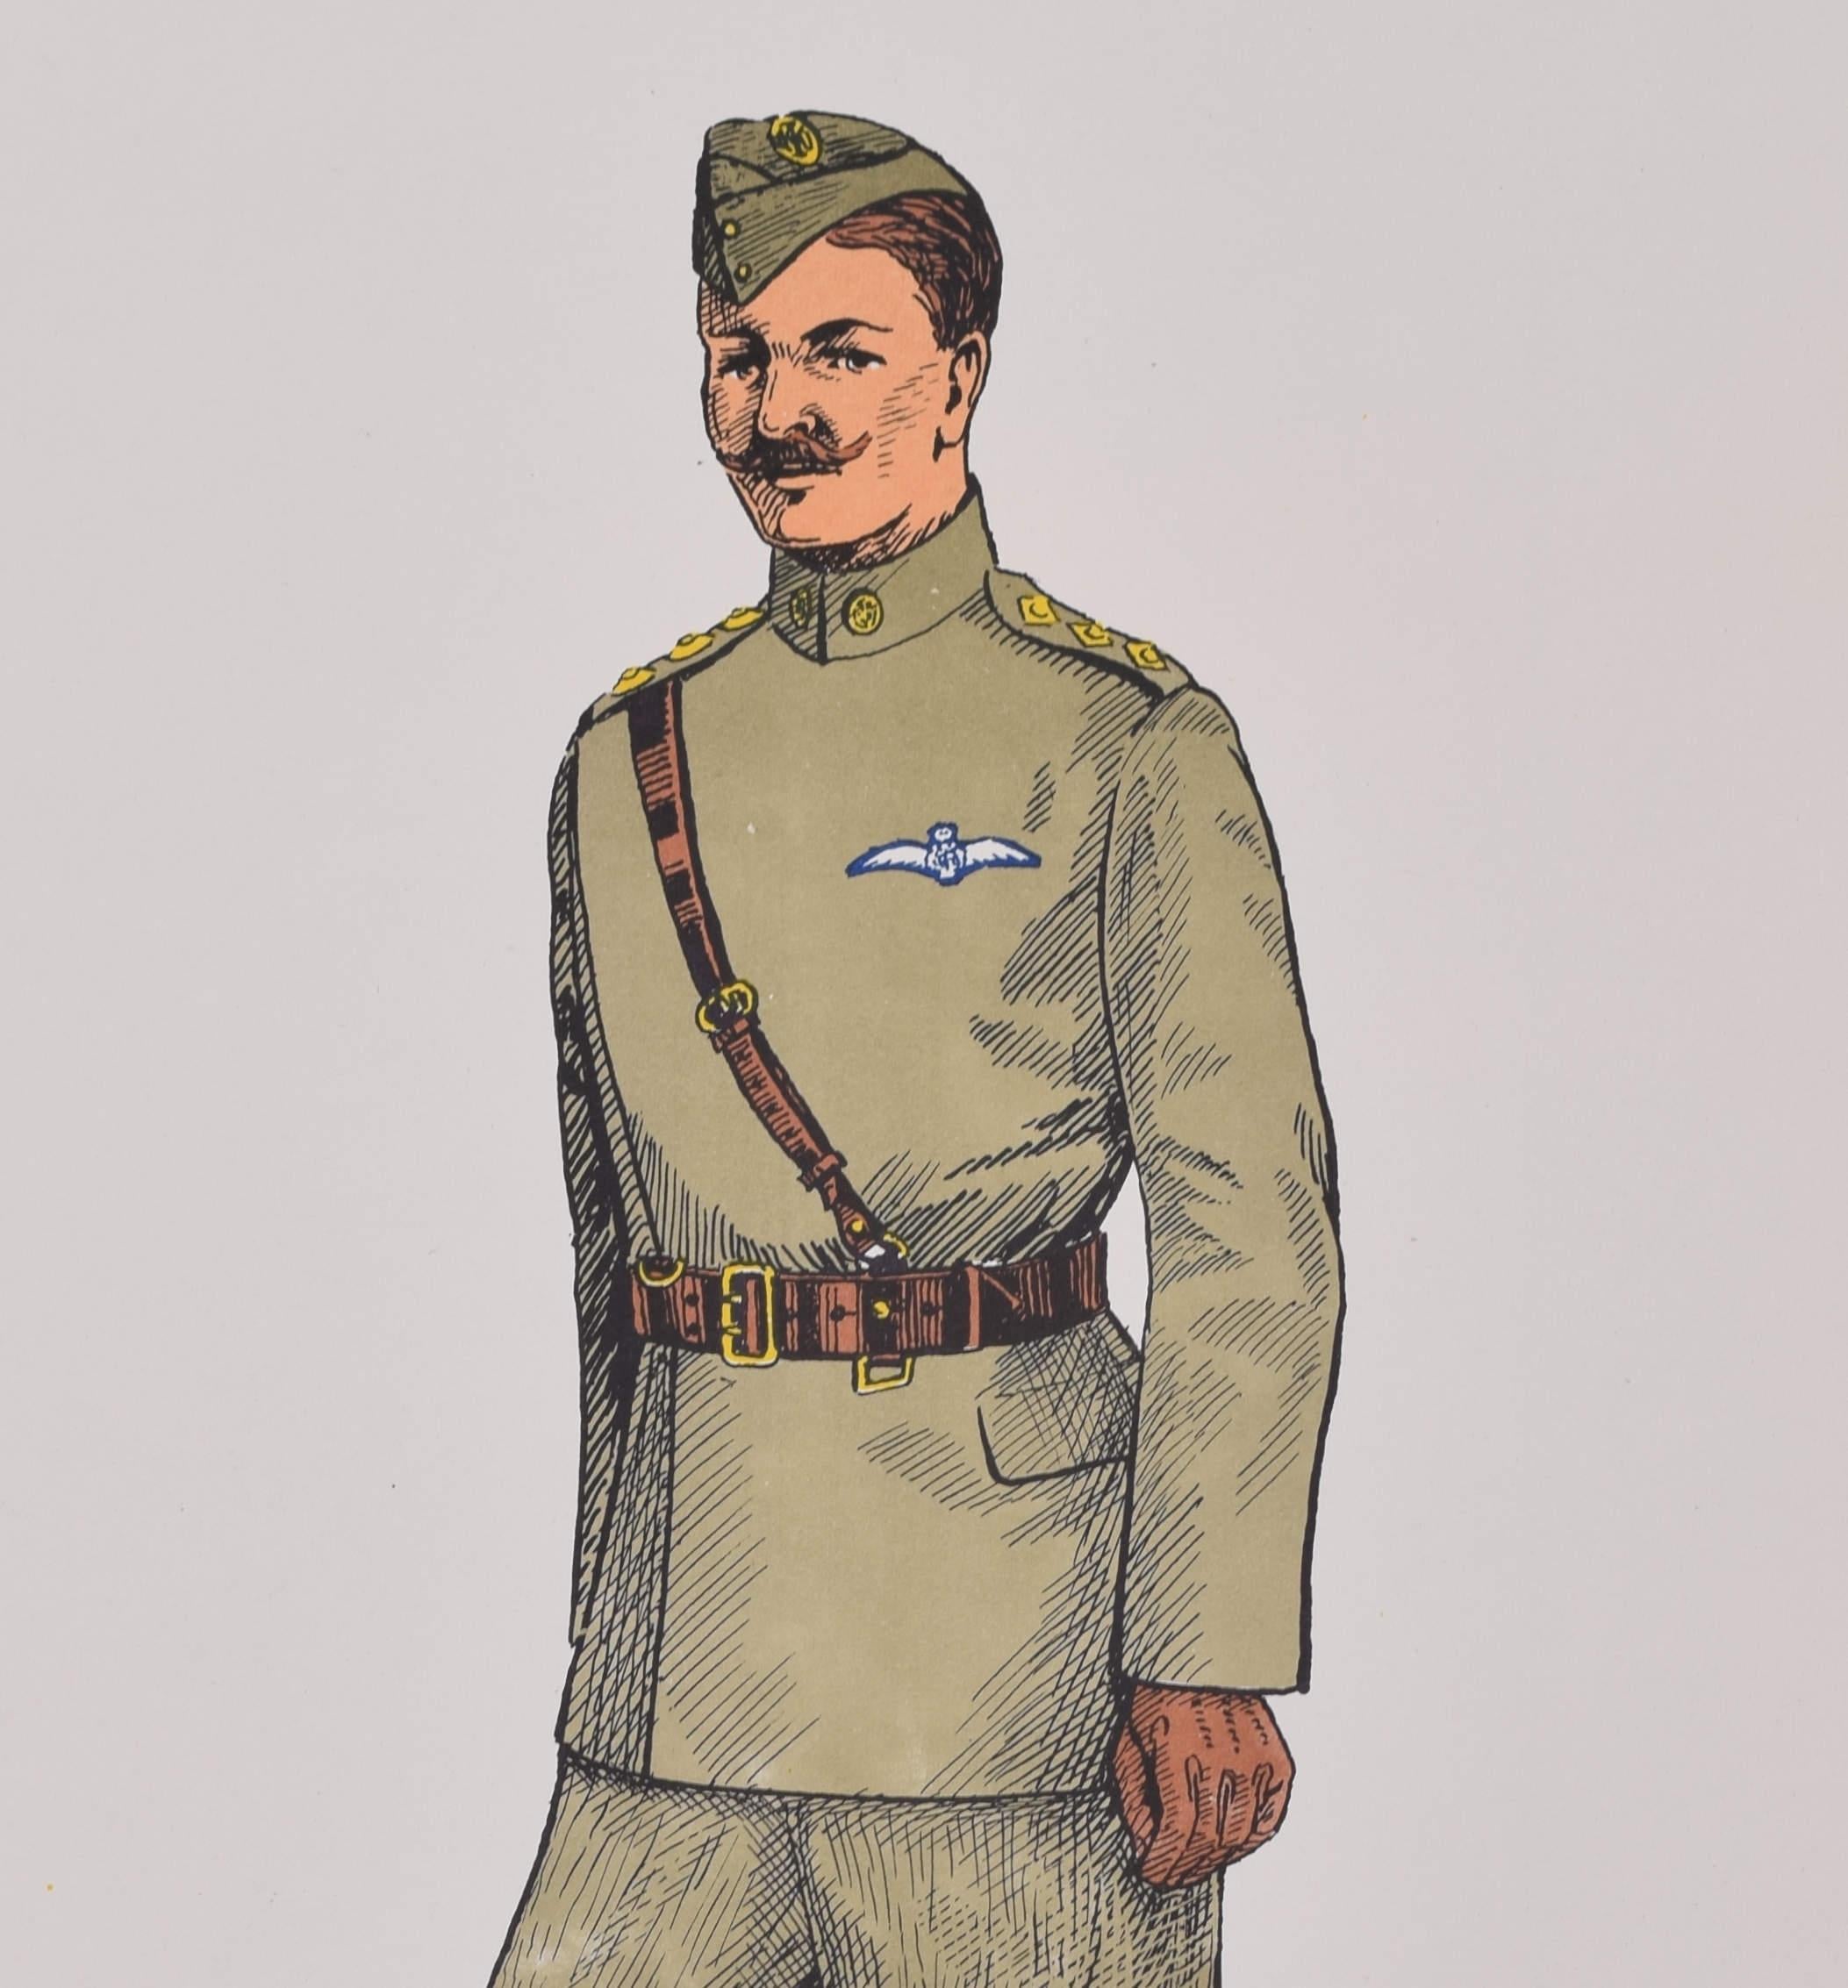 Royal Flying Corps (RAF) Officer Institute of Army Education uniform lithograph - Print by Unknown